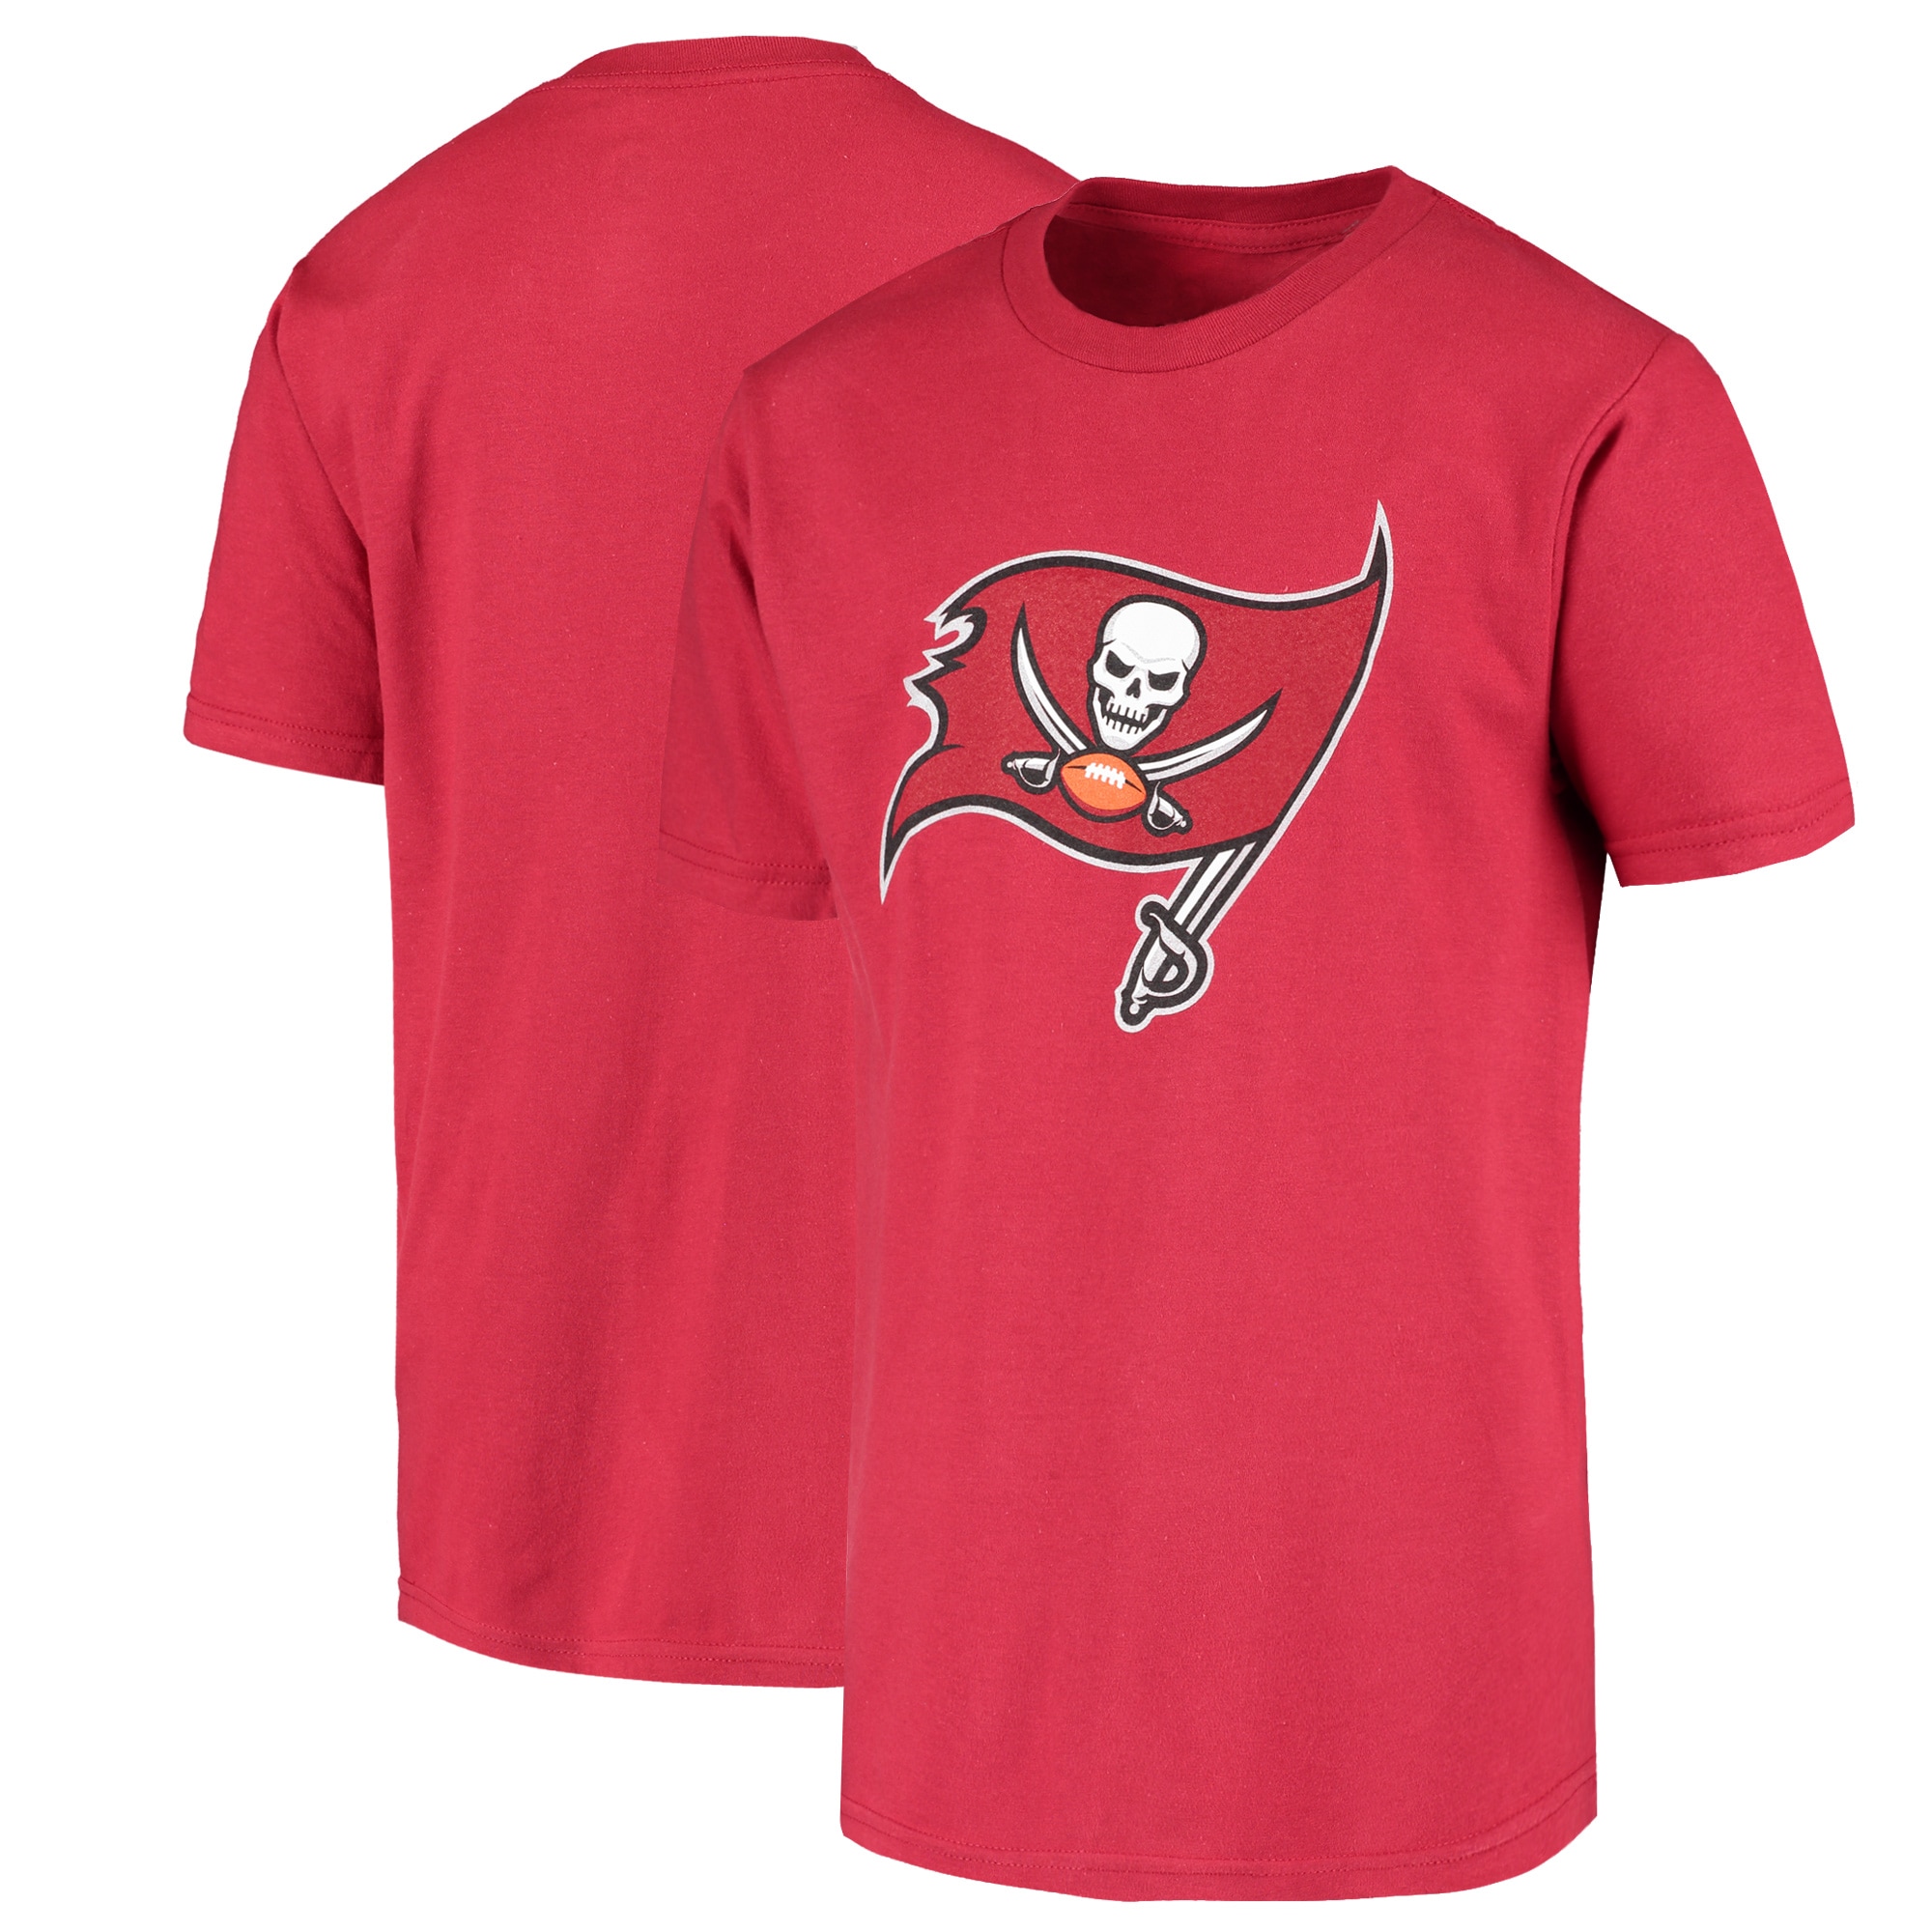 Buy Tampa Bay Buccaneers Youth Primary Logo T-Shirt - Red F3918001 Online